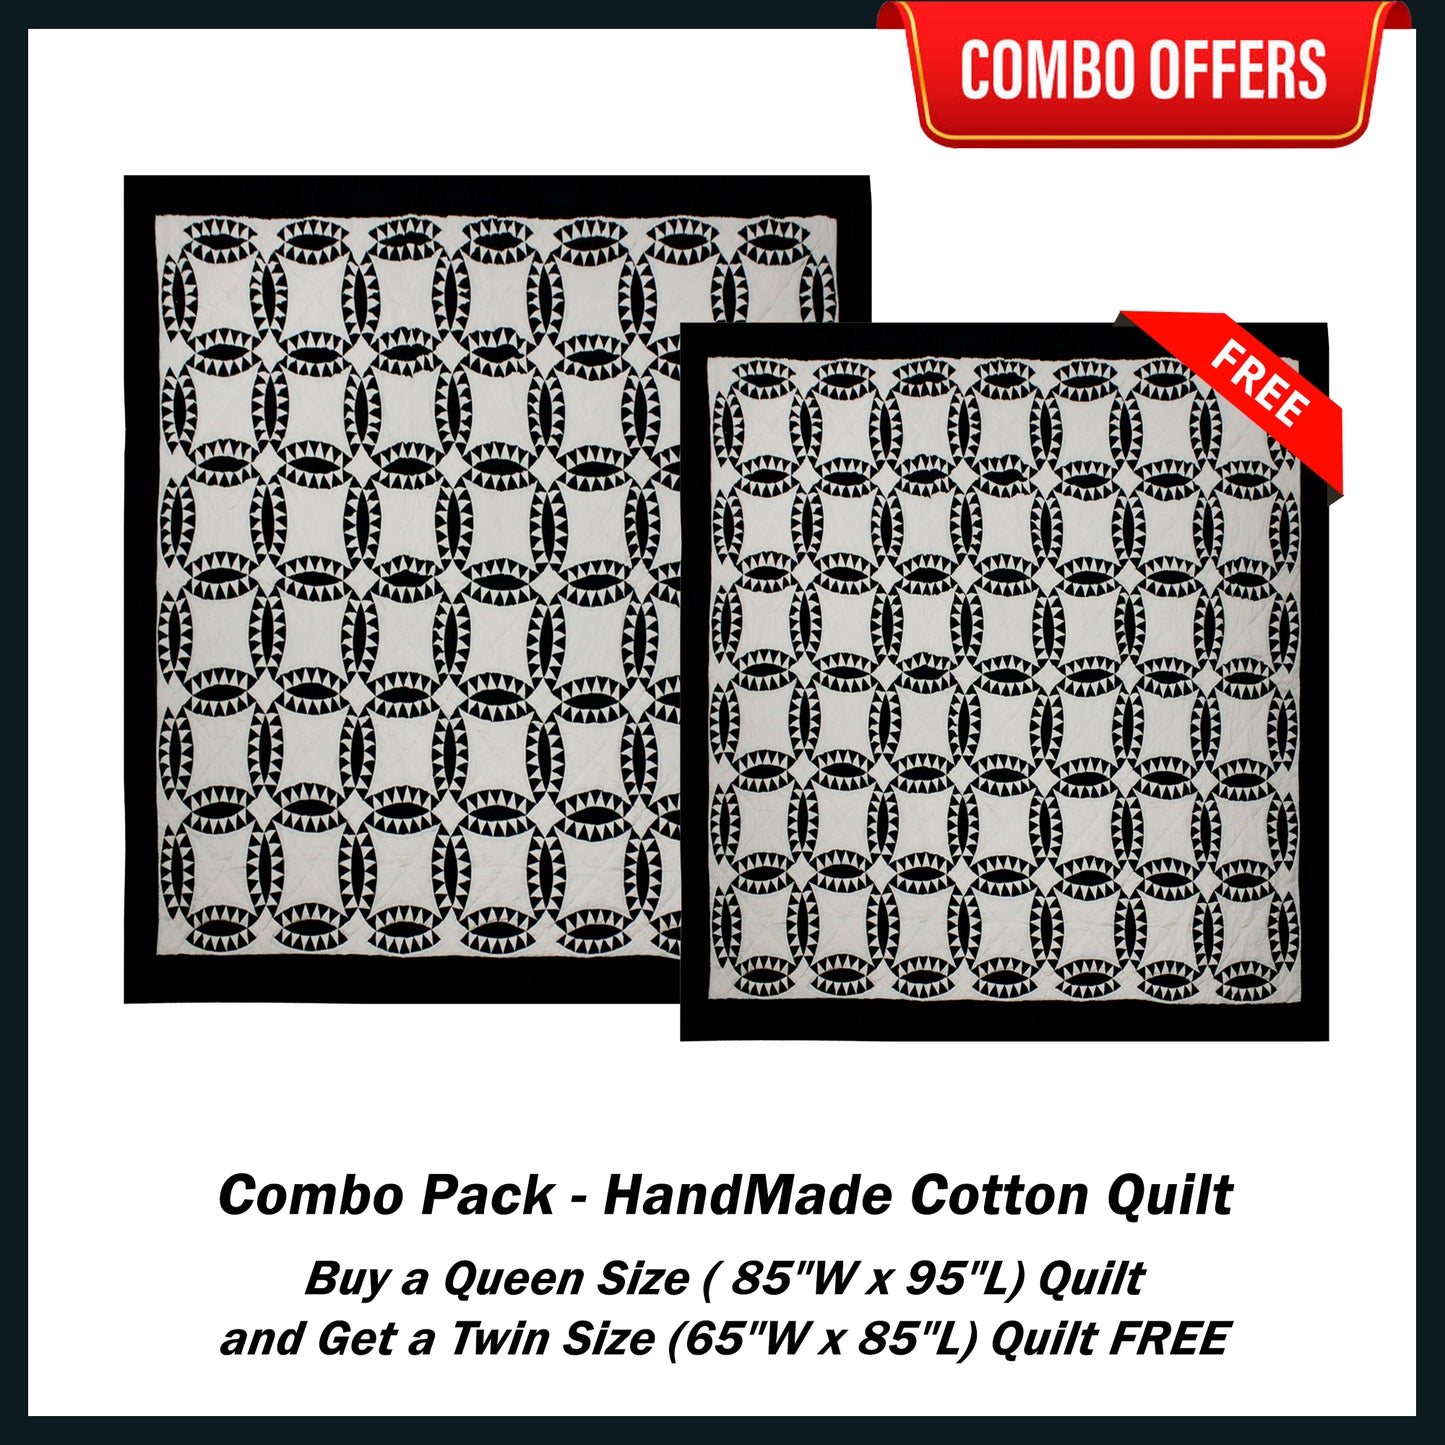 Cottage Star Handmade Cotton Quilt - Buy a Queen Size Quilt and Get a Twin Size Quilt FREE